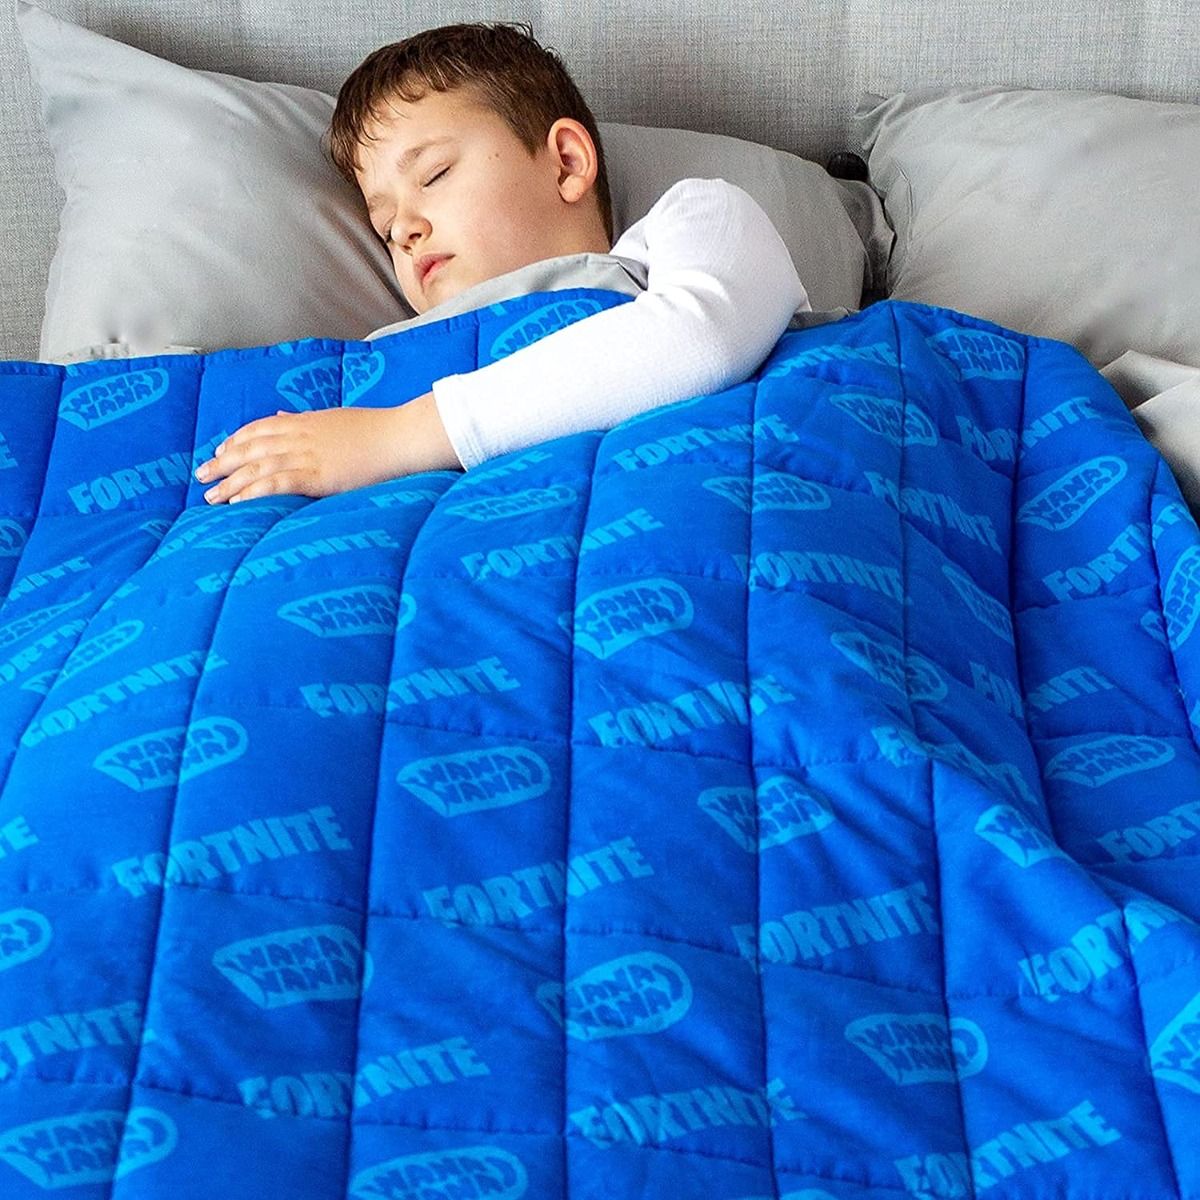 Fortnite Weighted Blanket - Blue